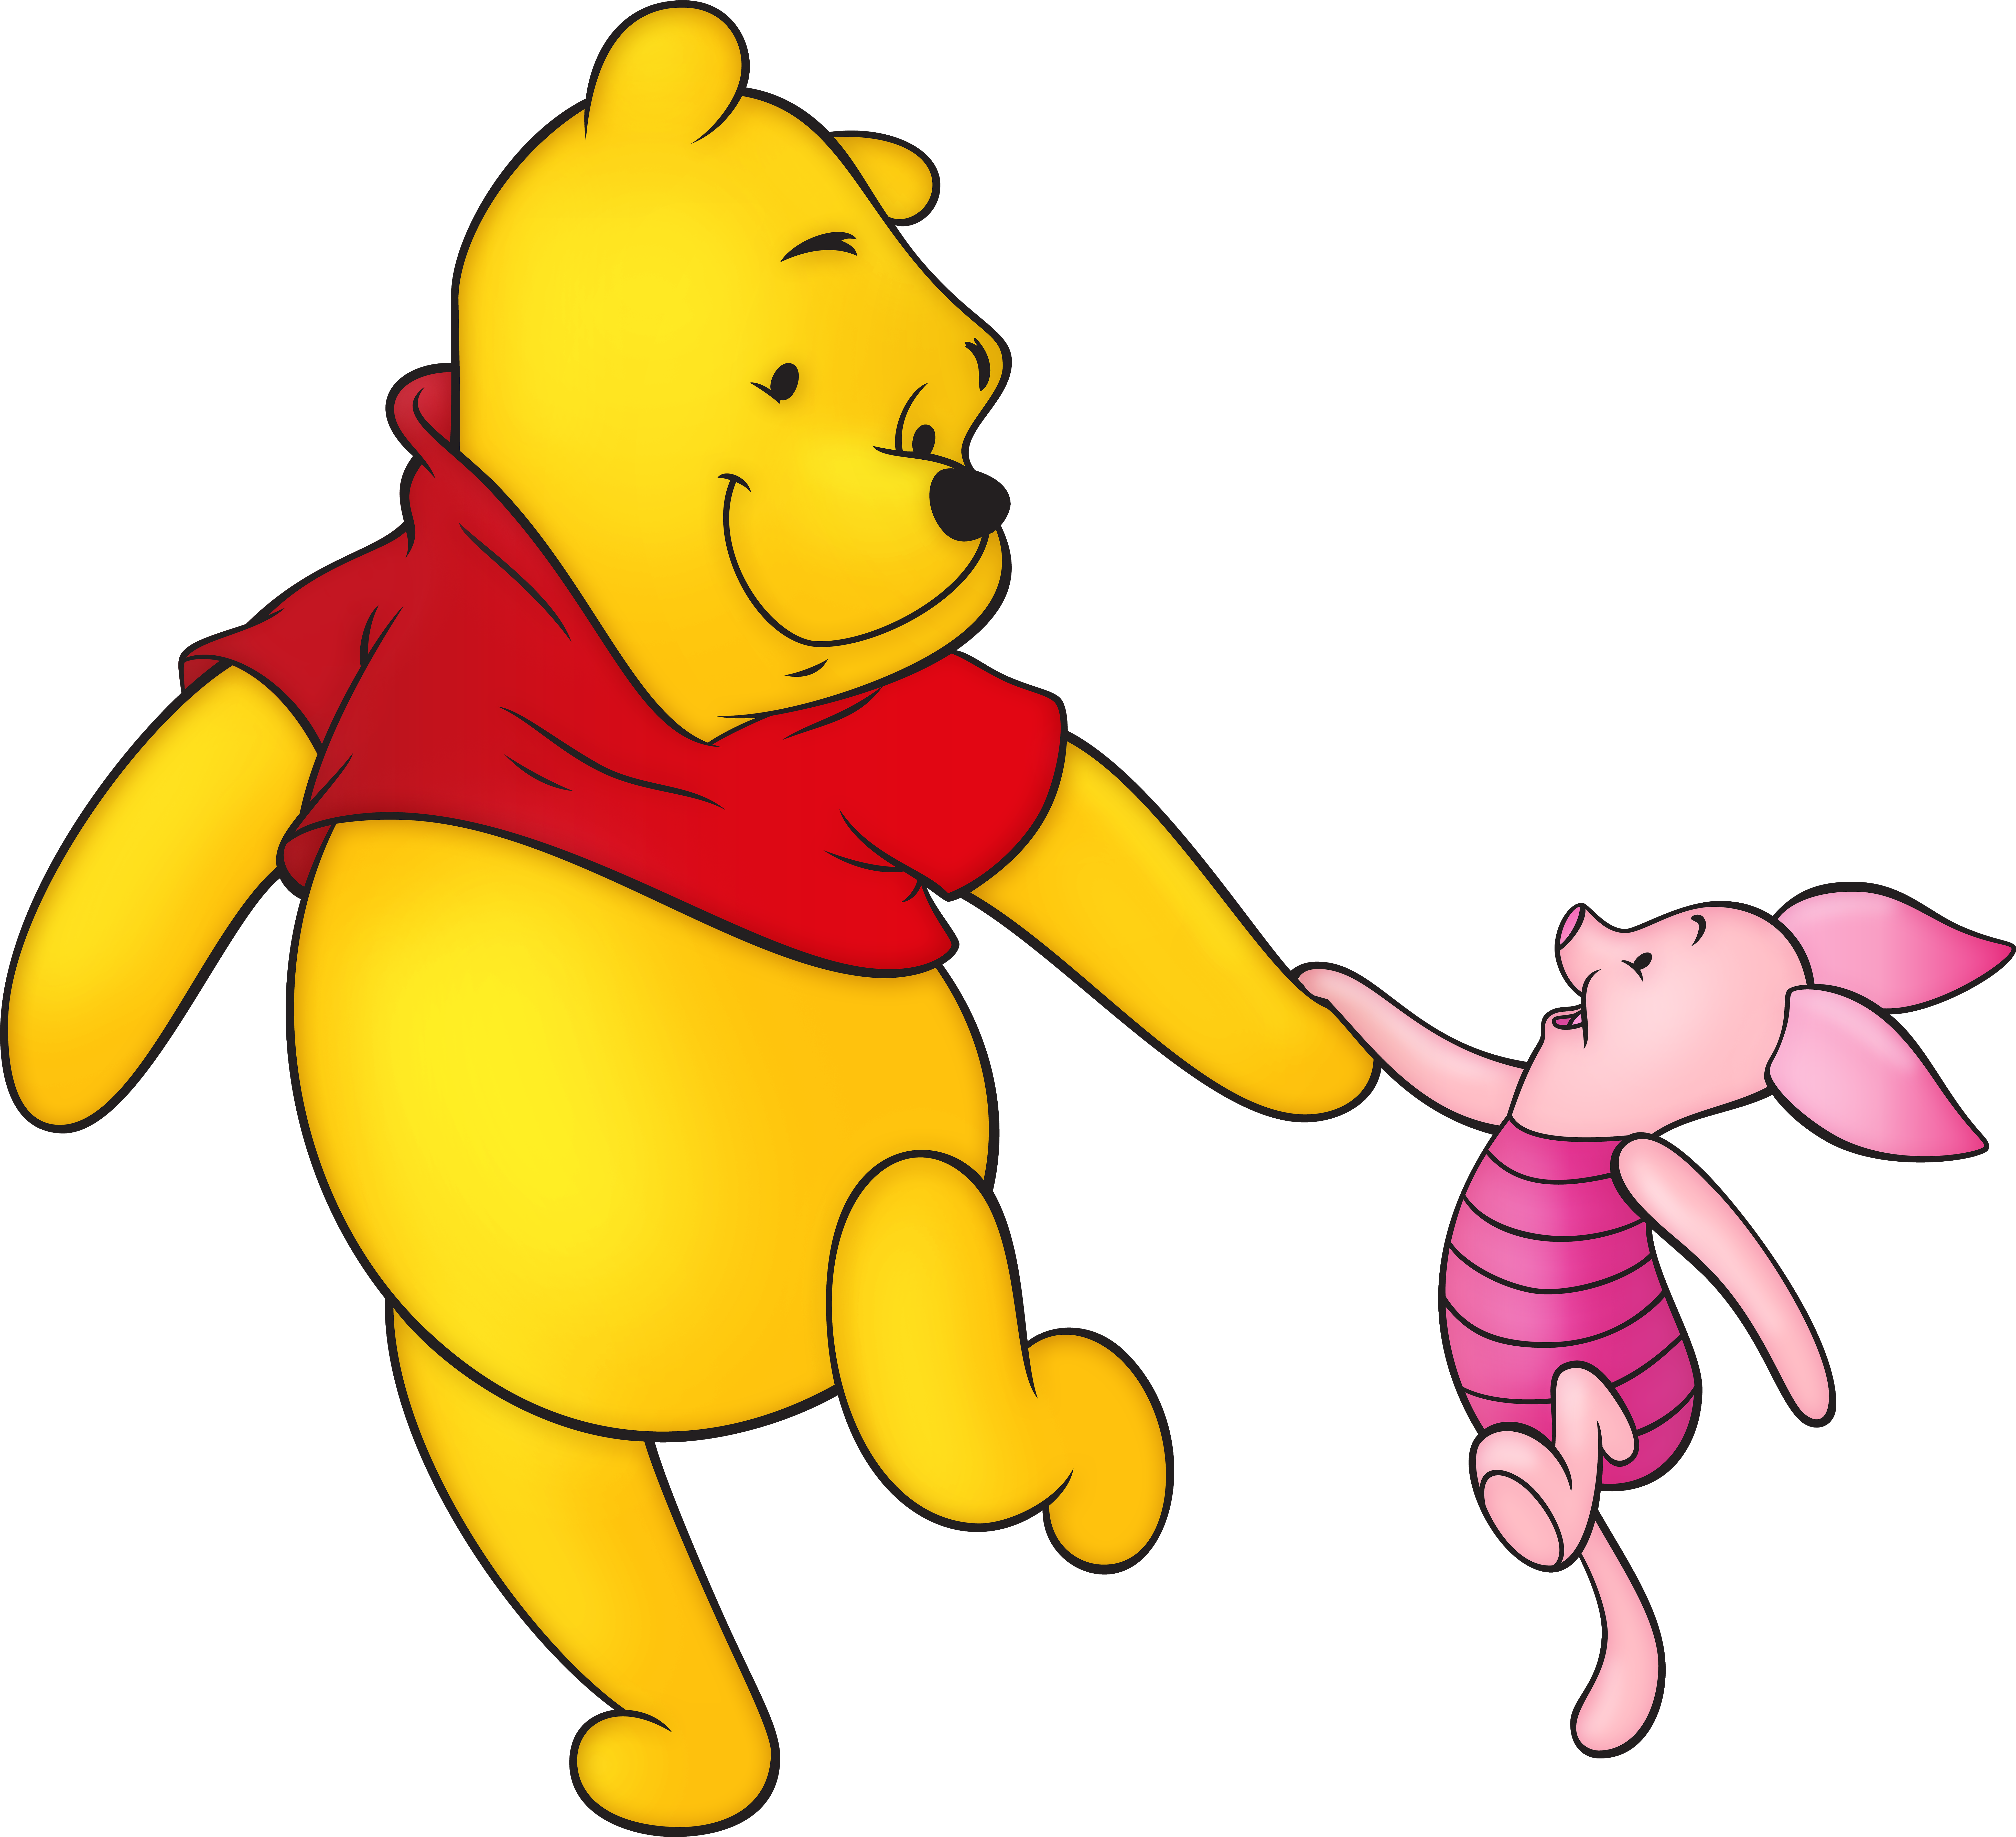 Winnie The Pooh And Piglet Free Png Clip Art Image - Winnie The Pooh And Piglet Free Png Clip Art Image (8000x7289)